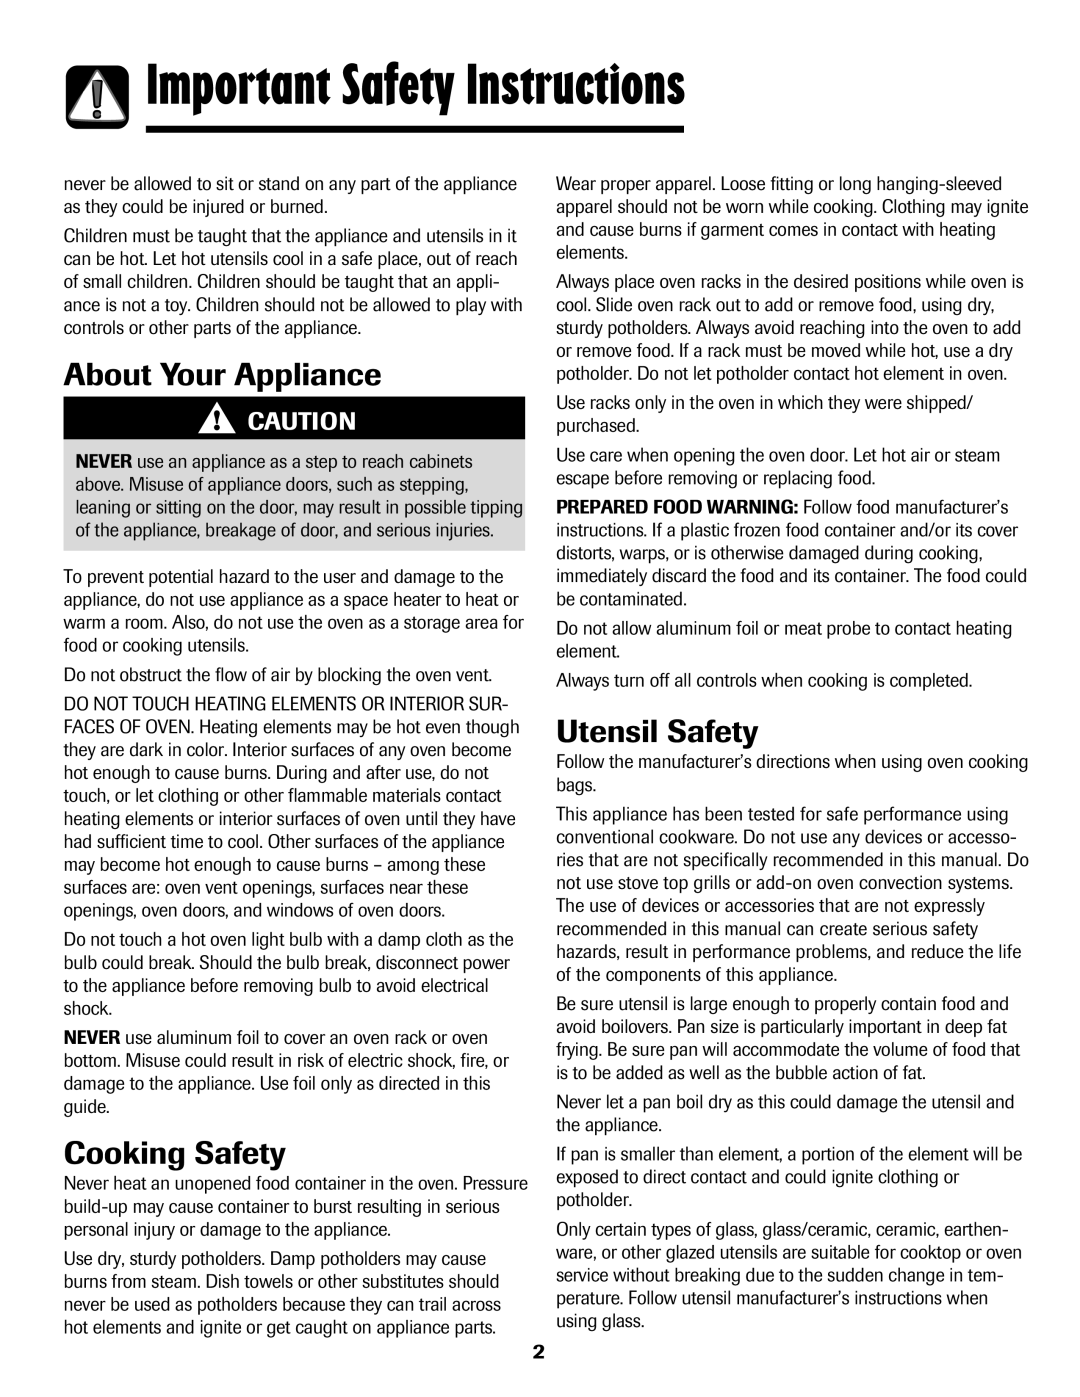 Amana Smoothtop Important Safety Instructions, About Your Appliance, Cooking Safety, Utensil Safety 